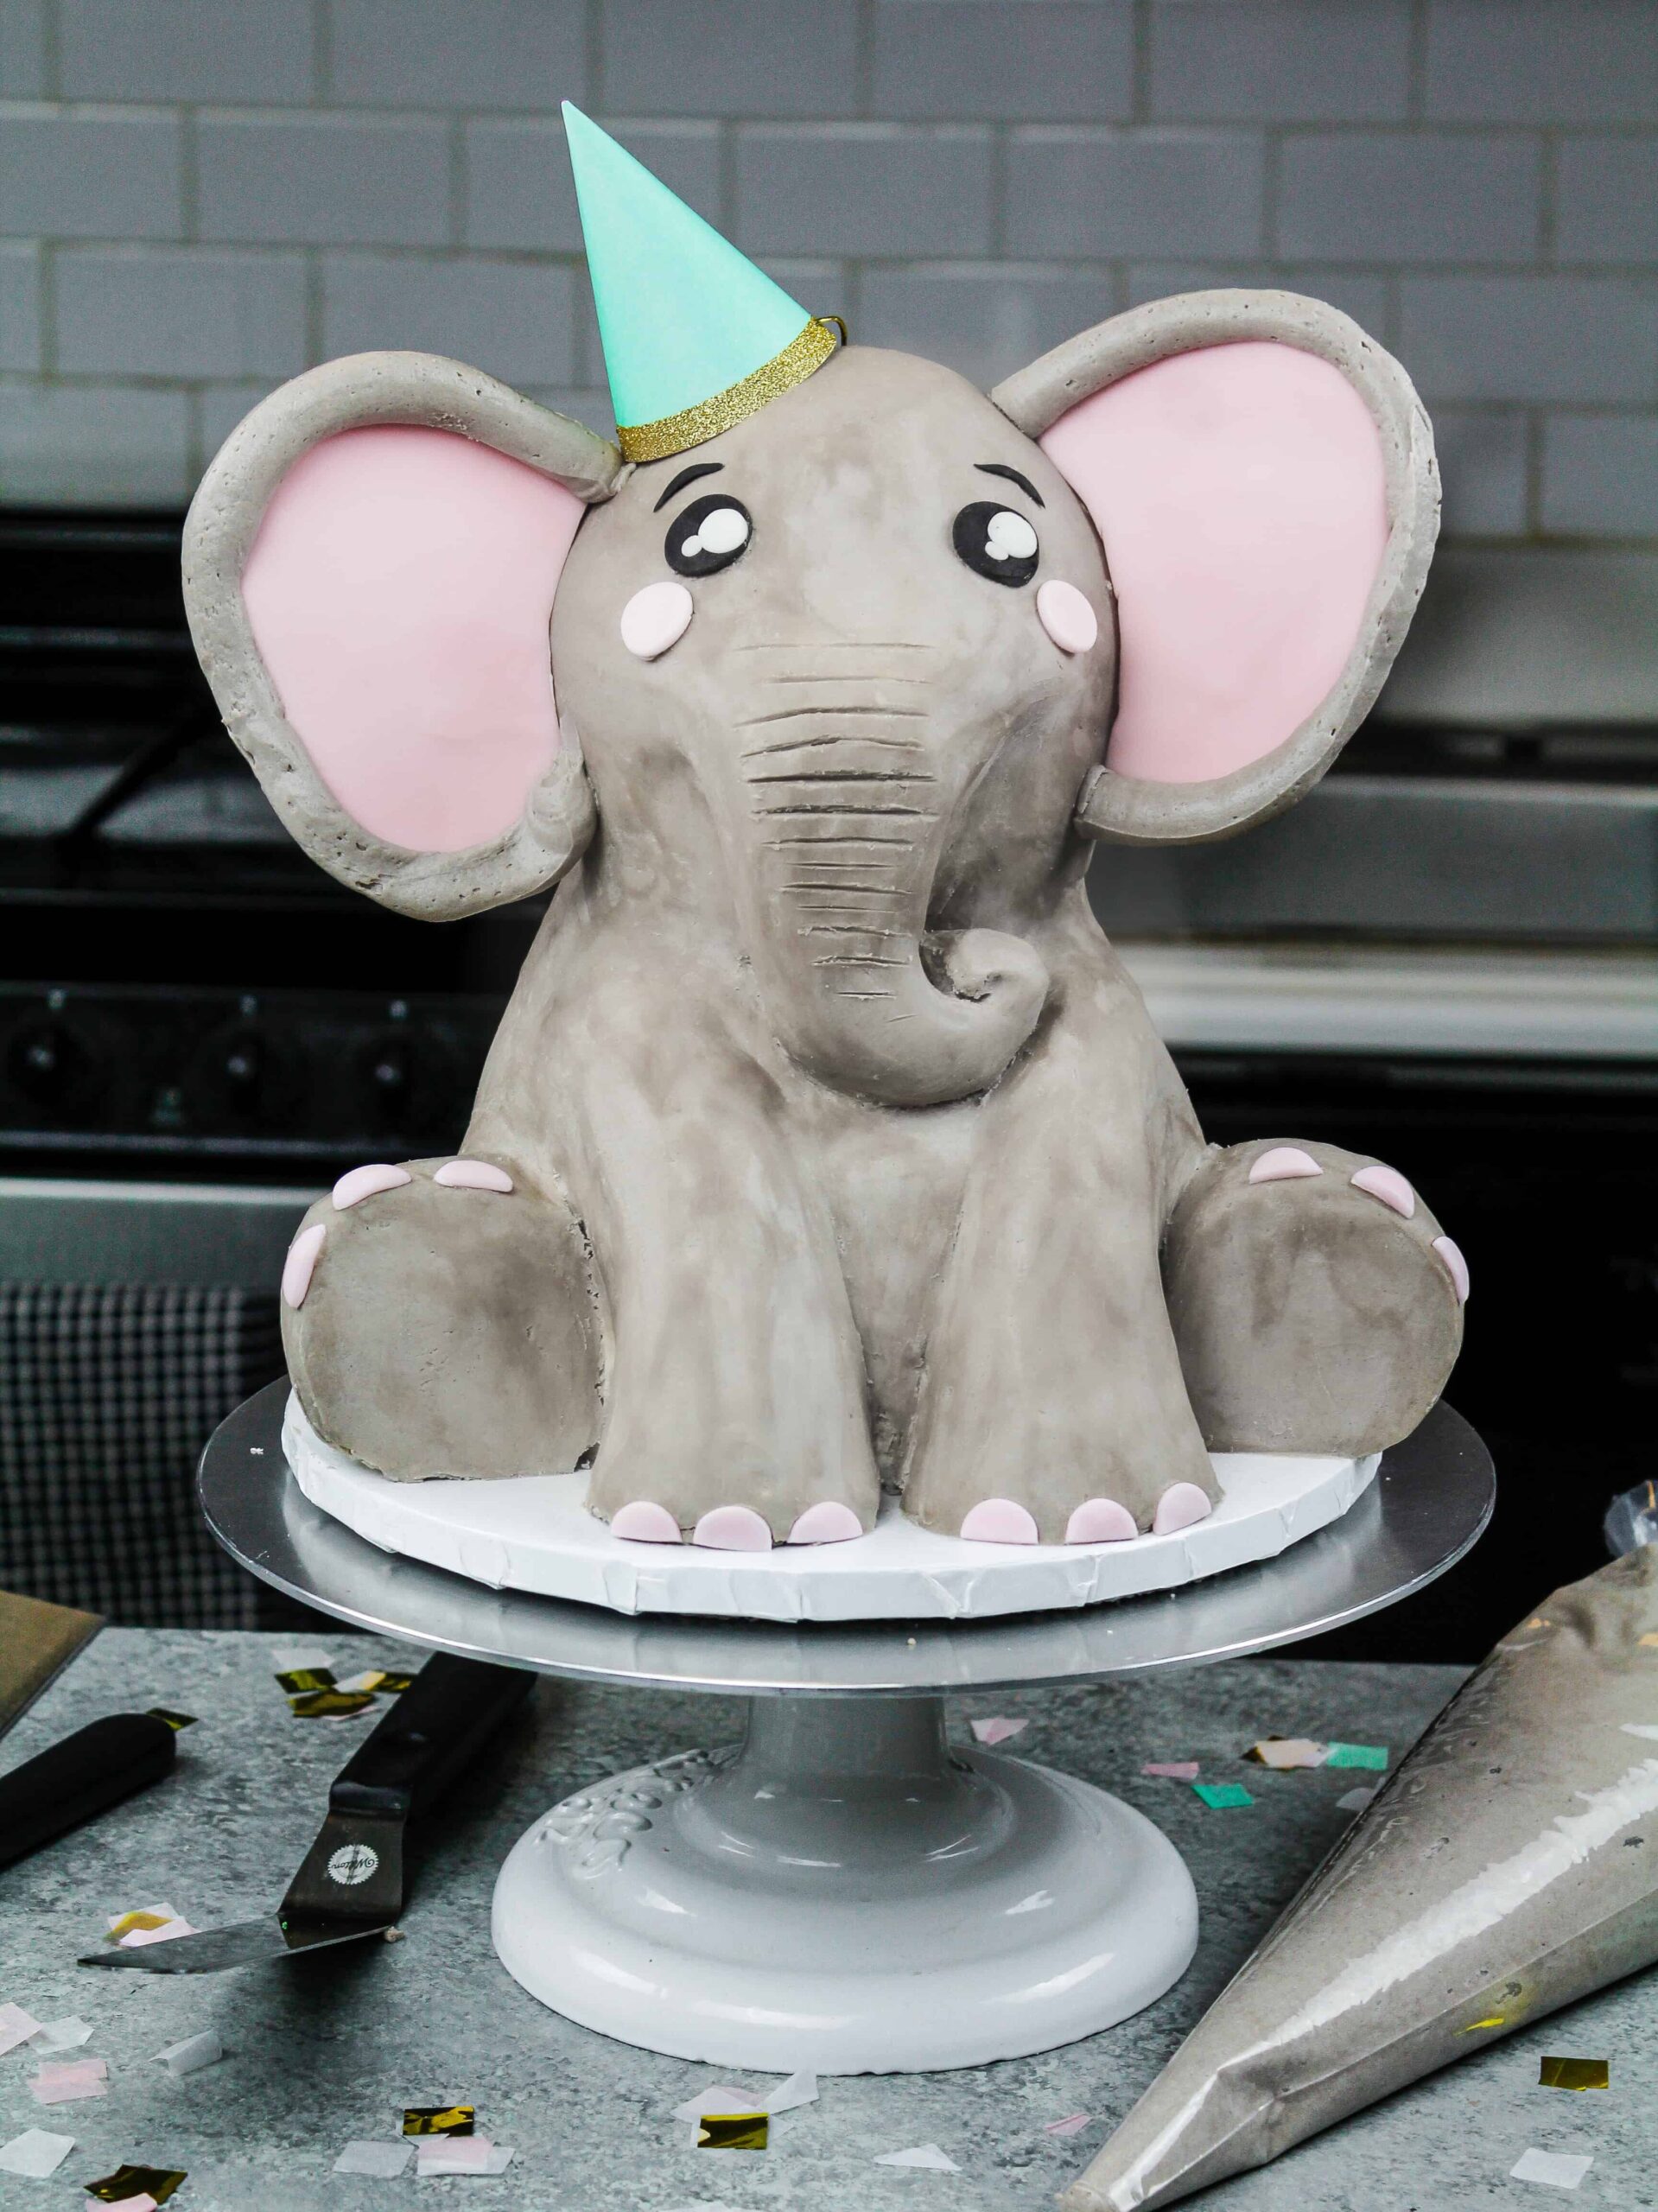 image of an elephant cake made mostly with buttercream and a little pink fondant